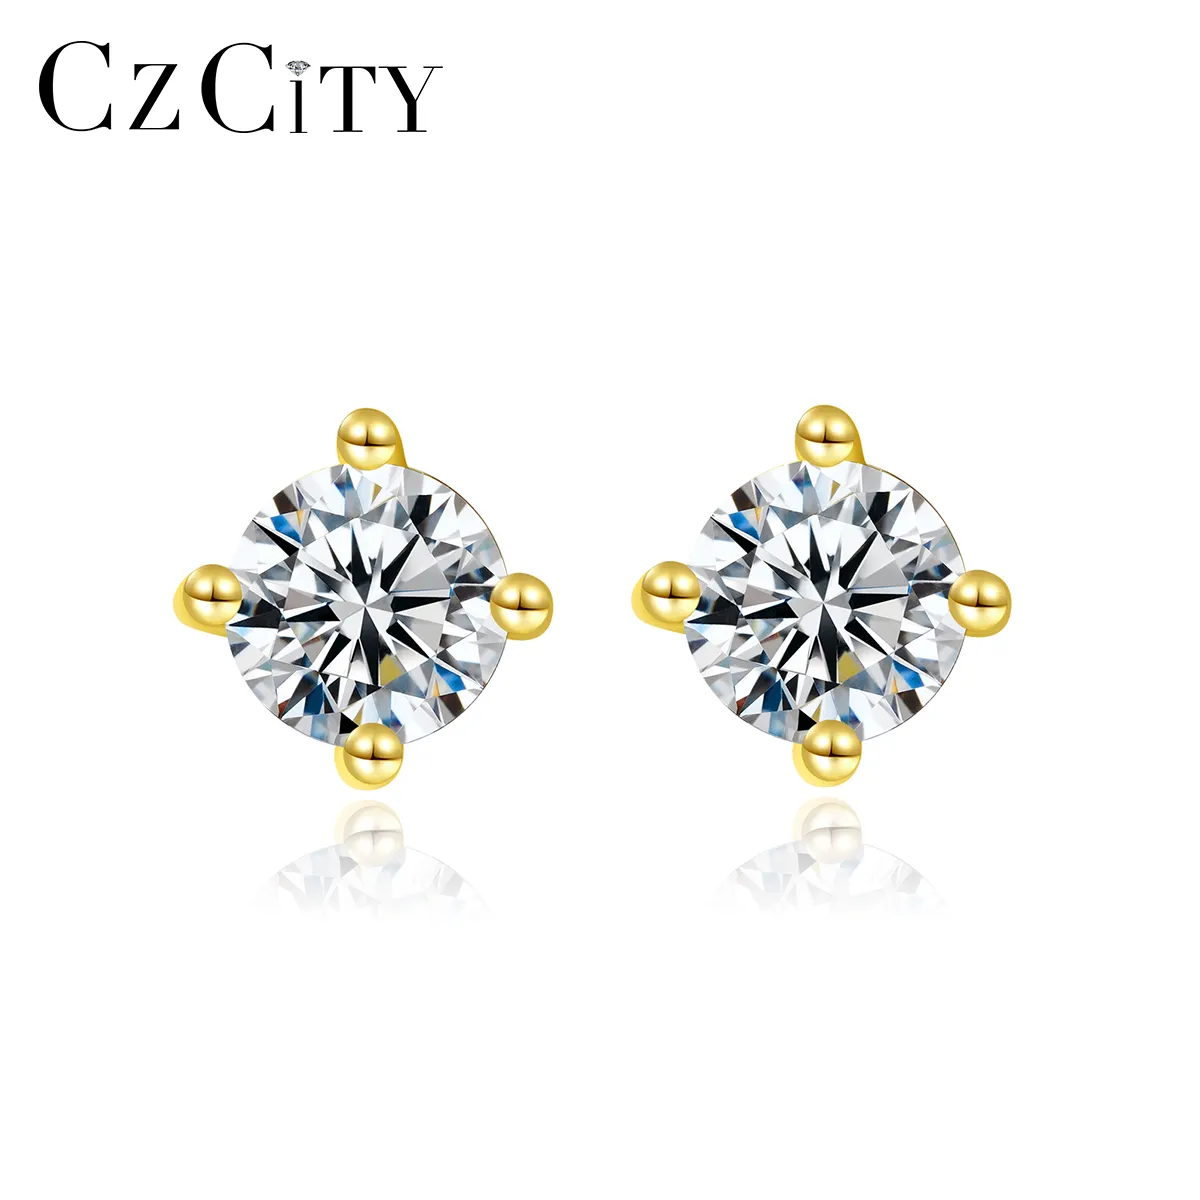 CZCITY Fashion Gold Small Earring Cubic Zirconia 14K Gold Plated Silver 925 Sterling CZ Stone Woman Stud Earring